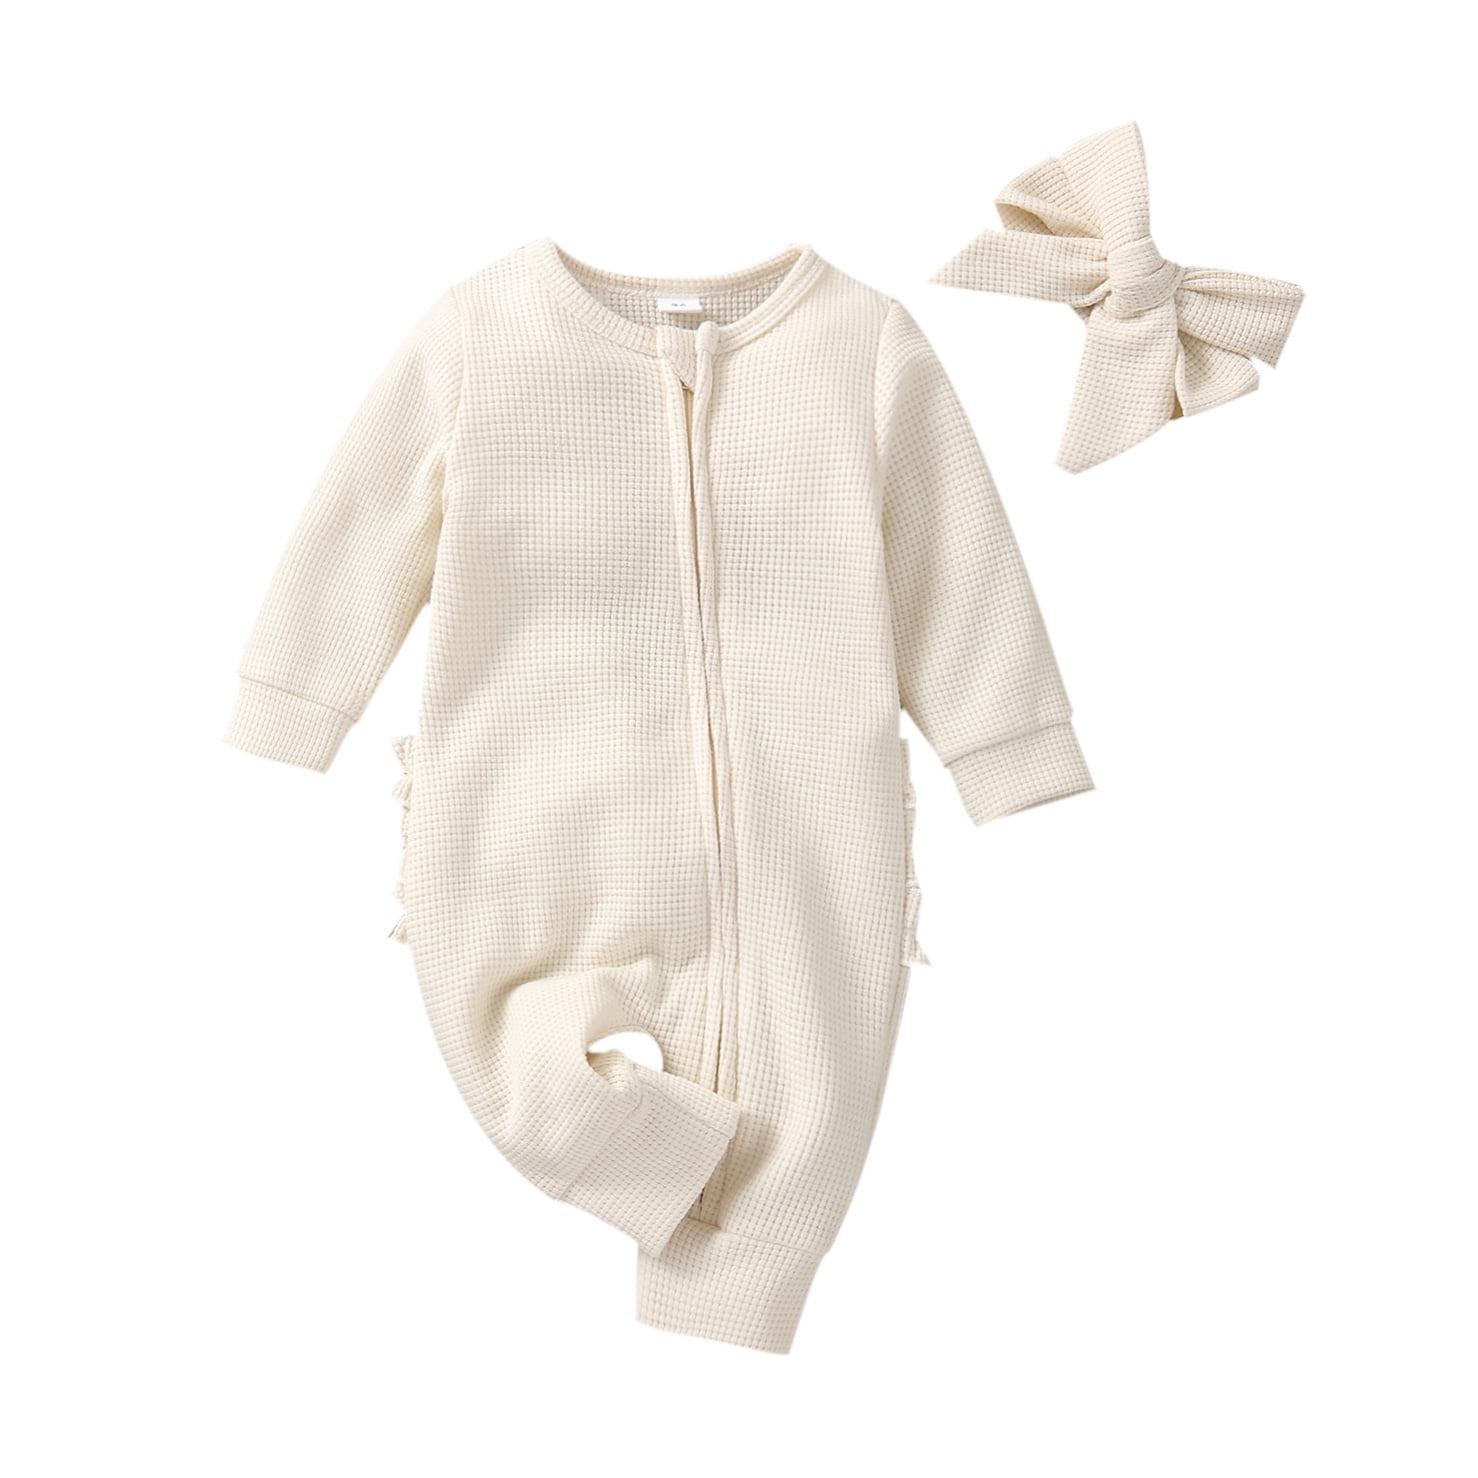 bebeshopdelageyhu Newborn Baby Girl Sweater Romper Ruffle Sleeve Cotton Knitted Bodysuit Fall Winter Outfit Clothes 